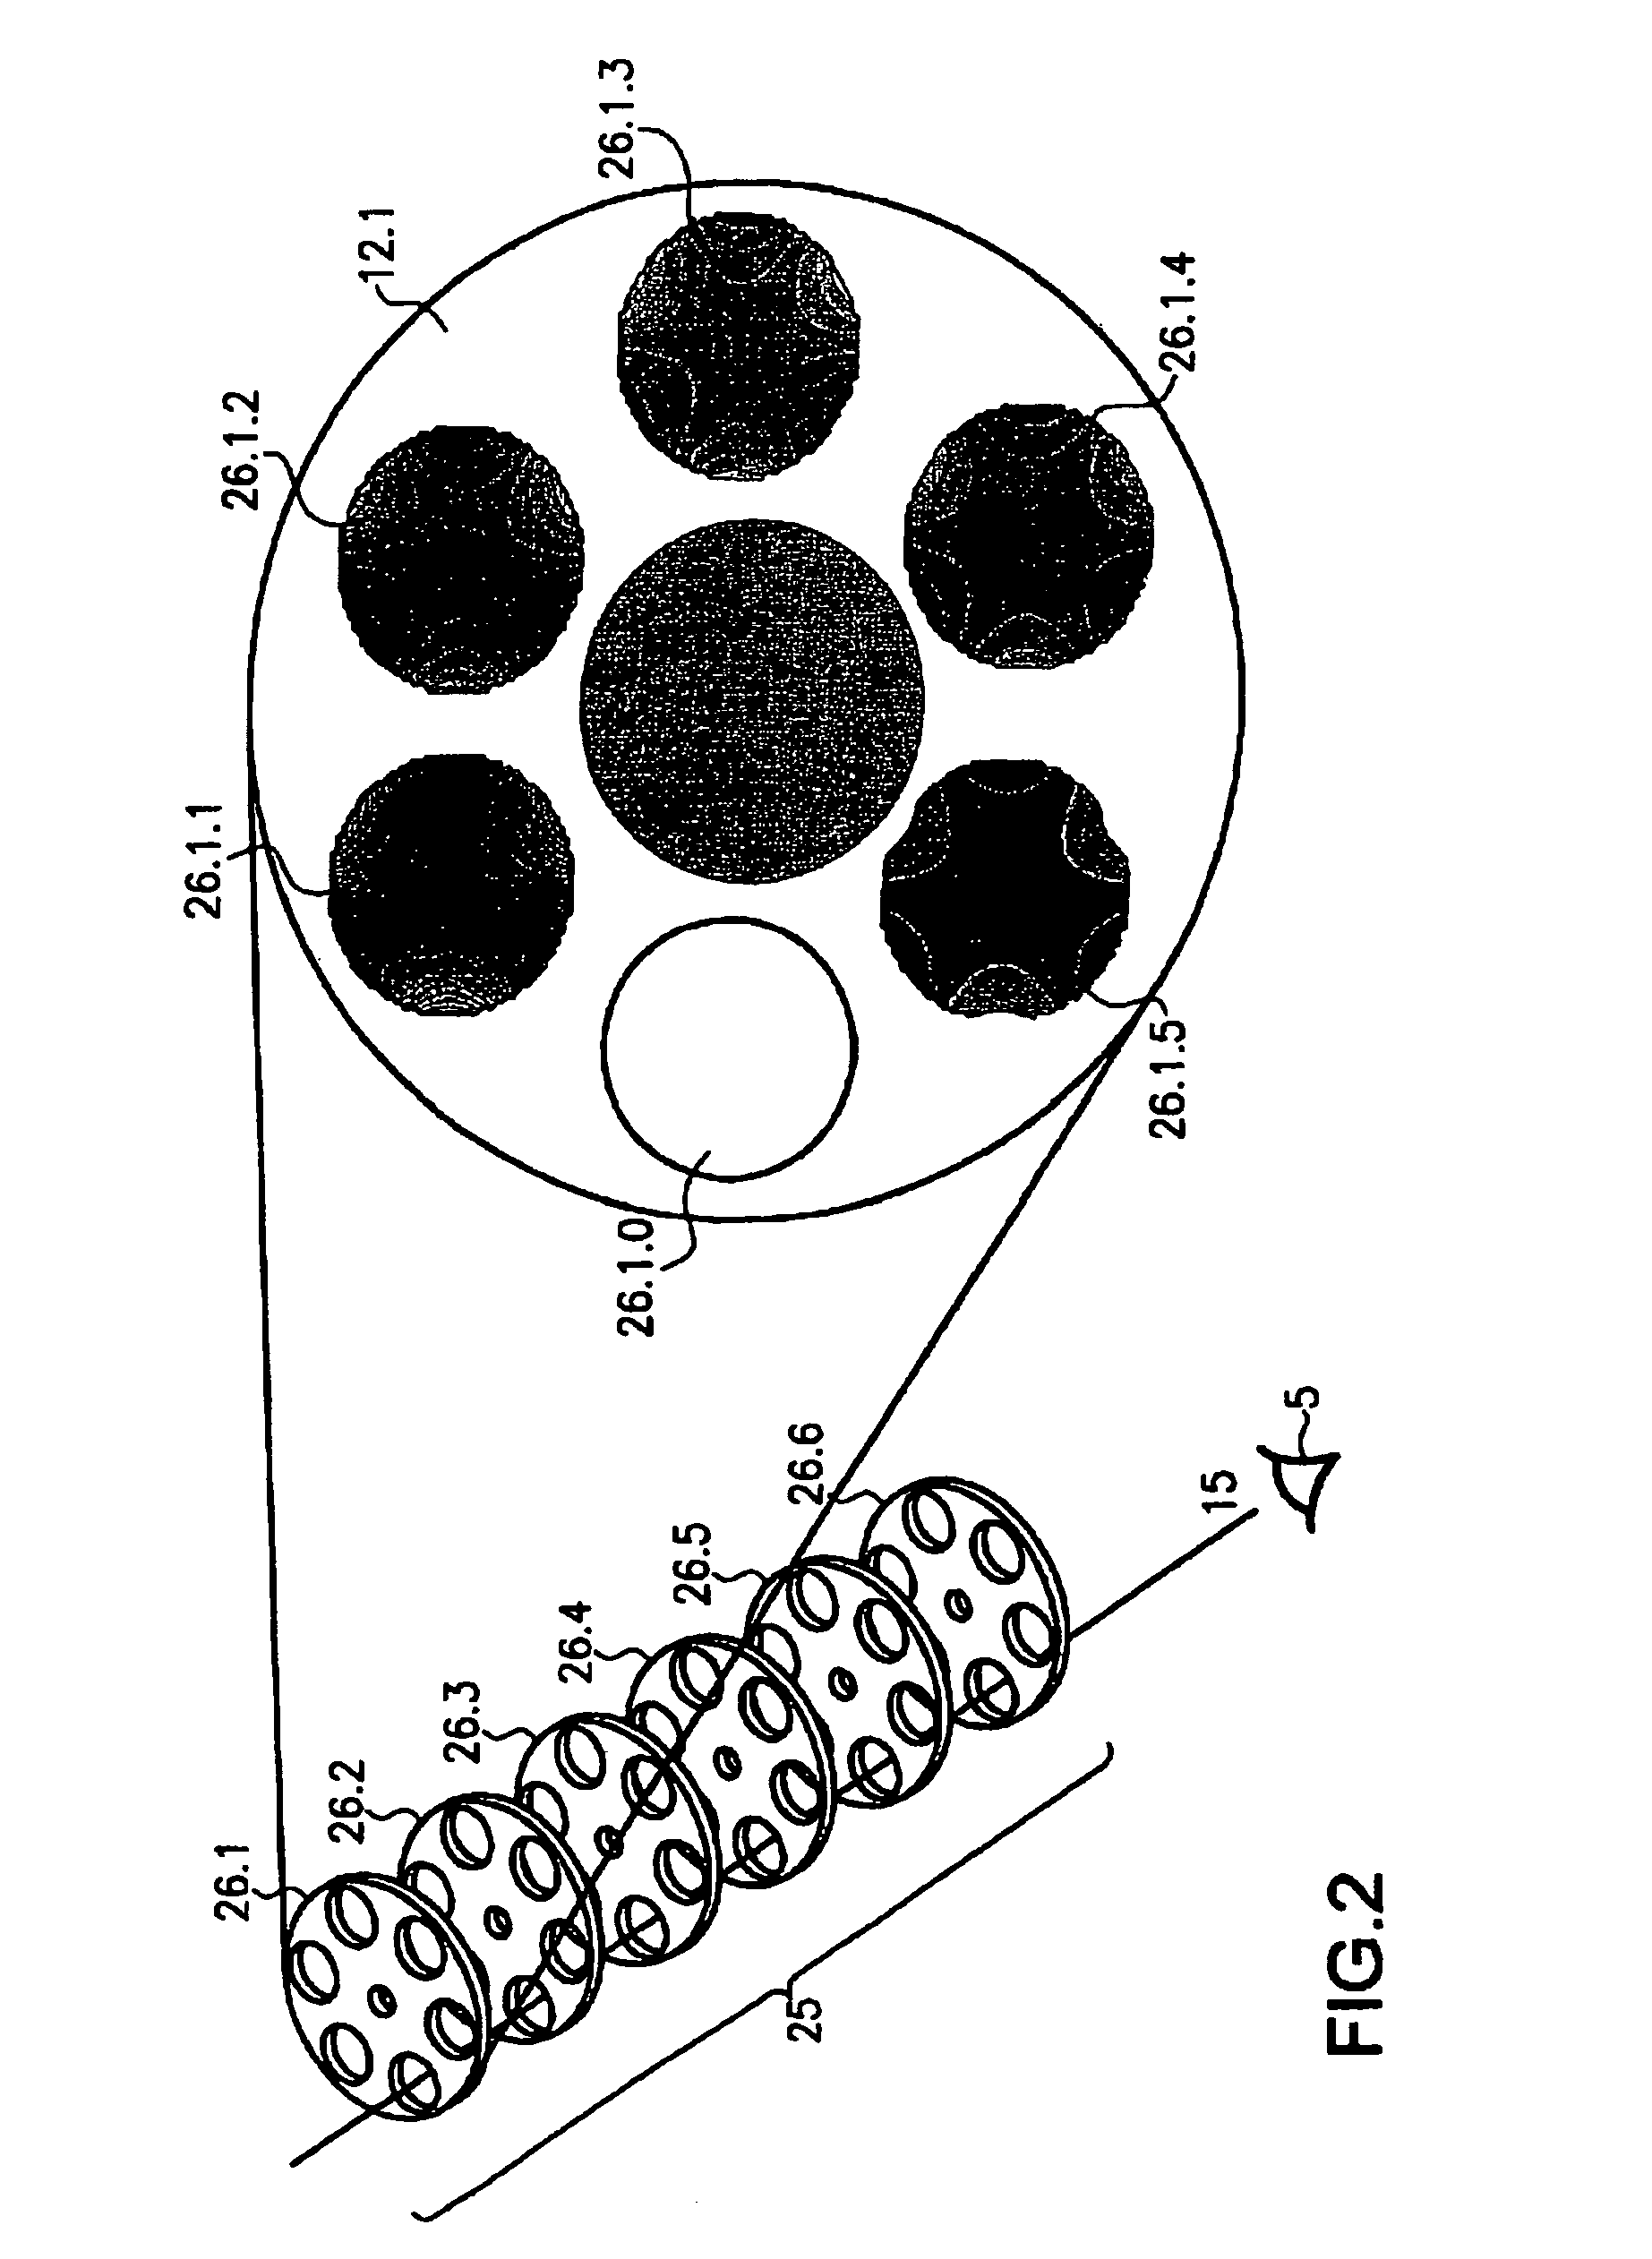 Method and device for the subjective determination of aberrations of higher order